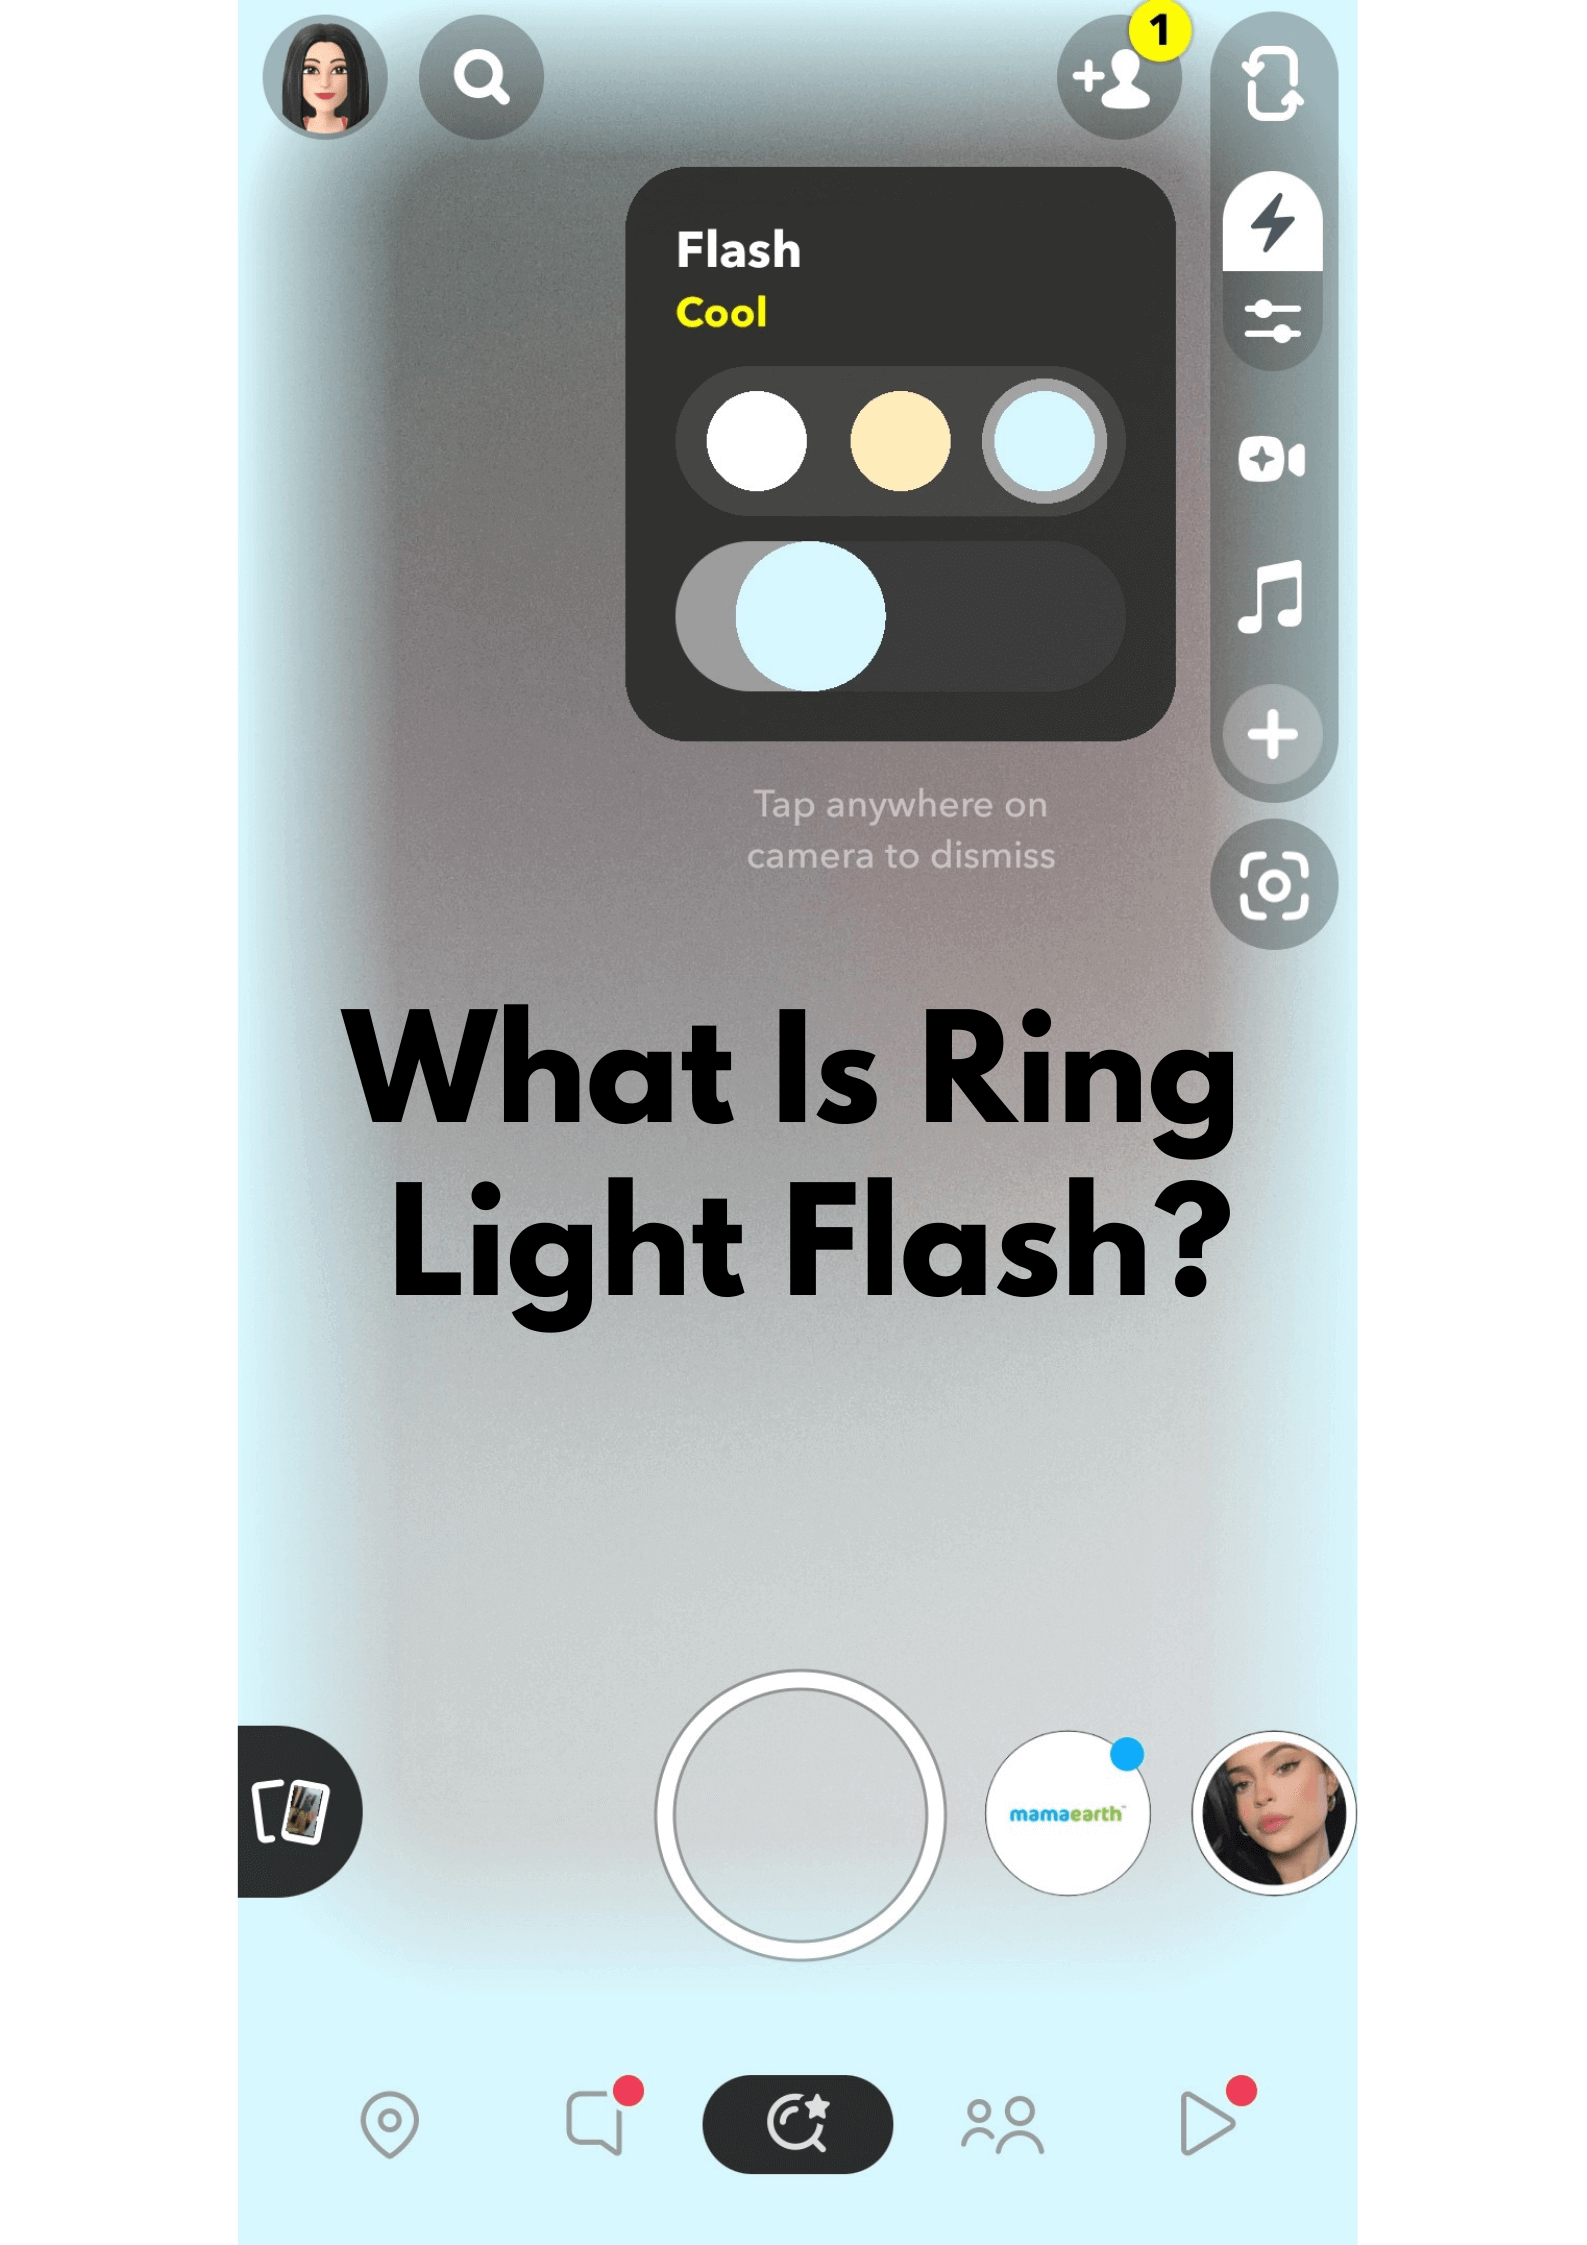 How To Get Snapchat's Ring Light Flash On iPhone & Android